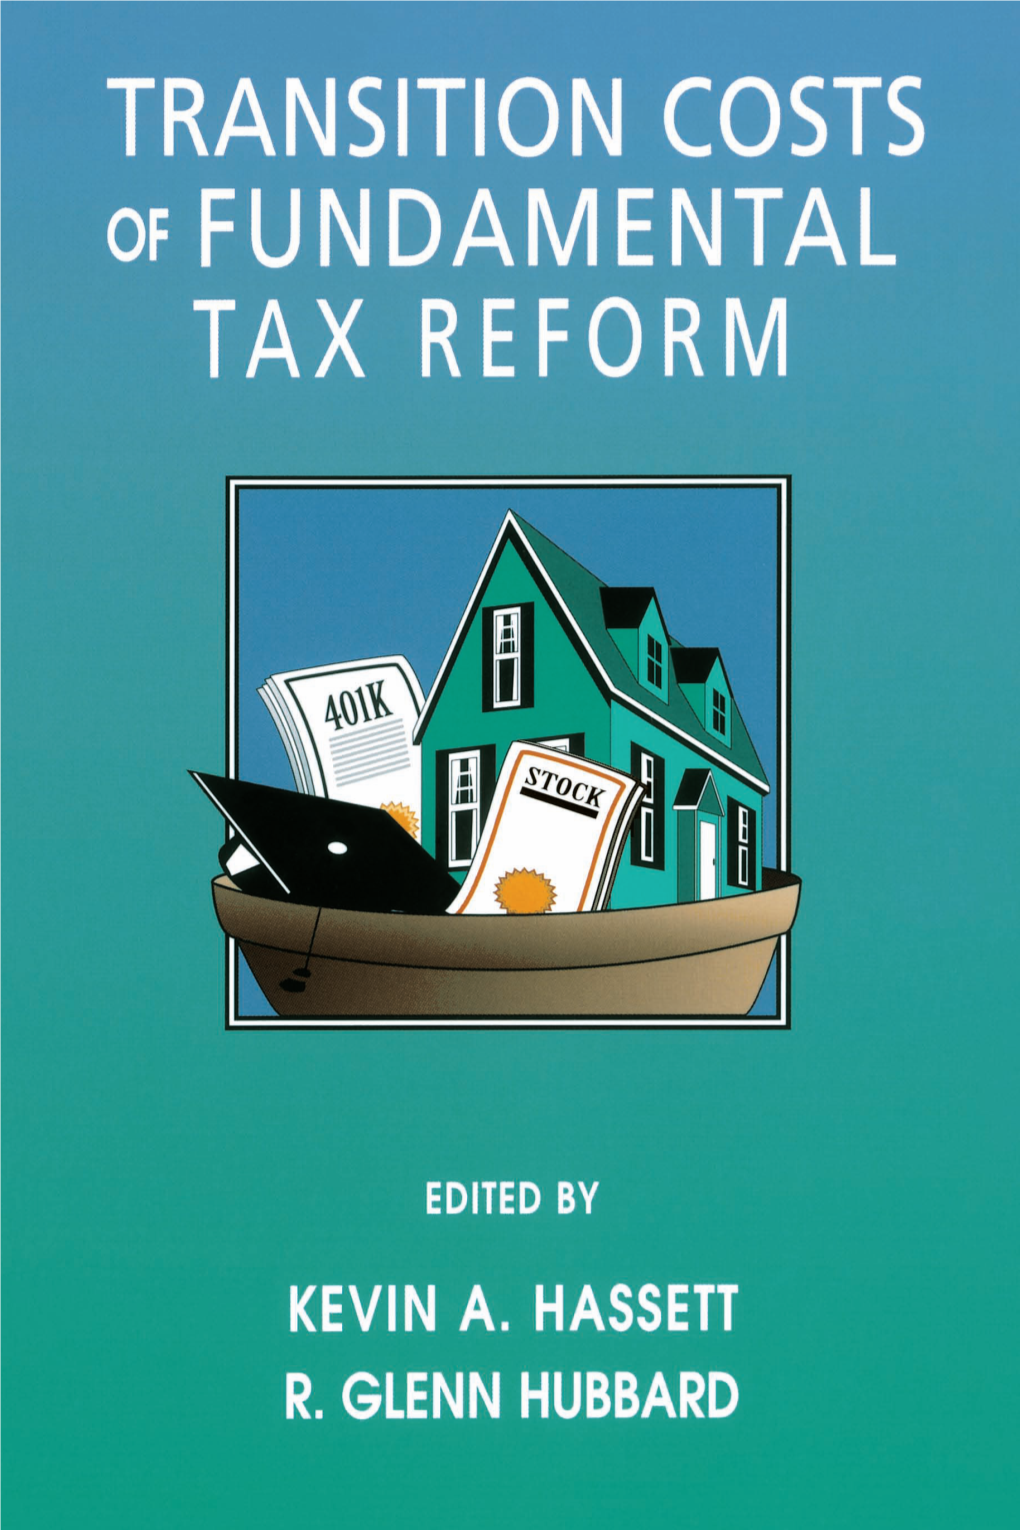 A Book on Tax Reform